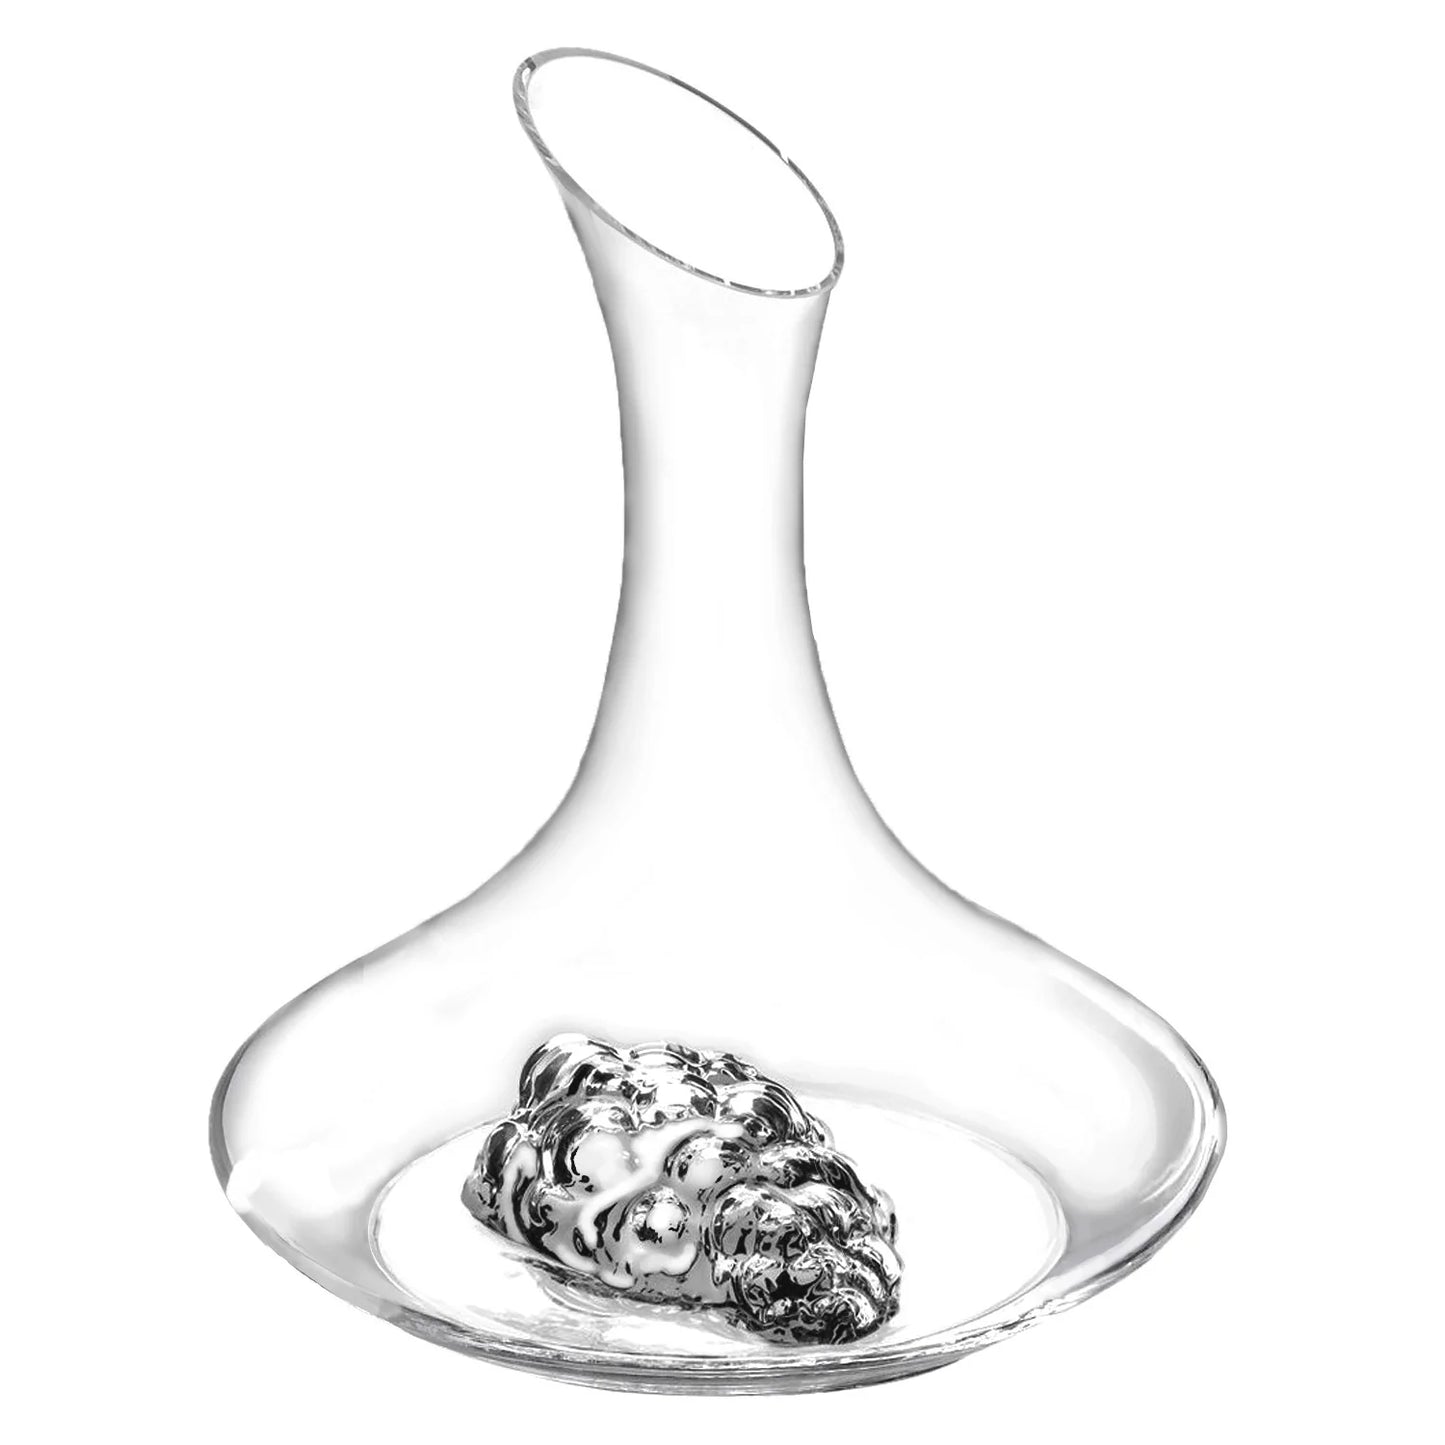 Ravenscroft Crystal Grapes Decanter with Free Luxury Satin Decanter Bag W2111